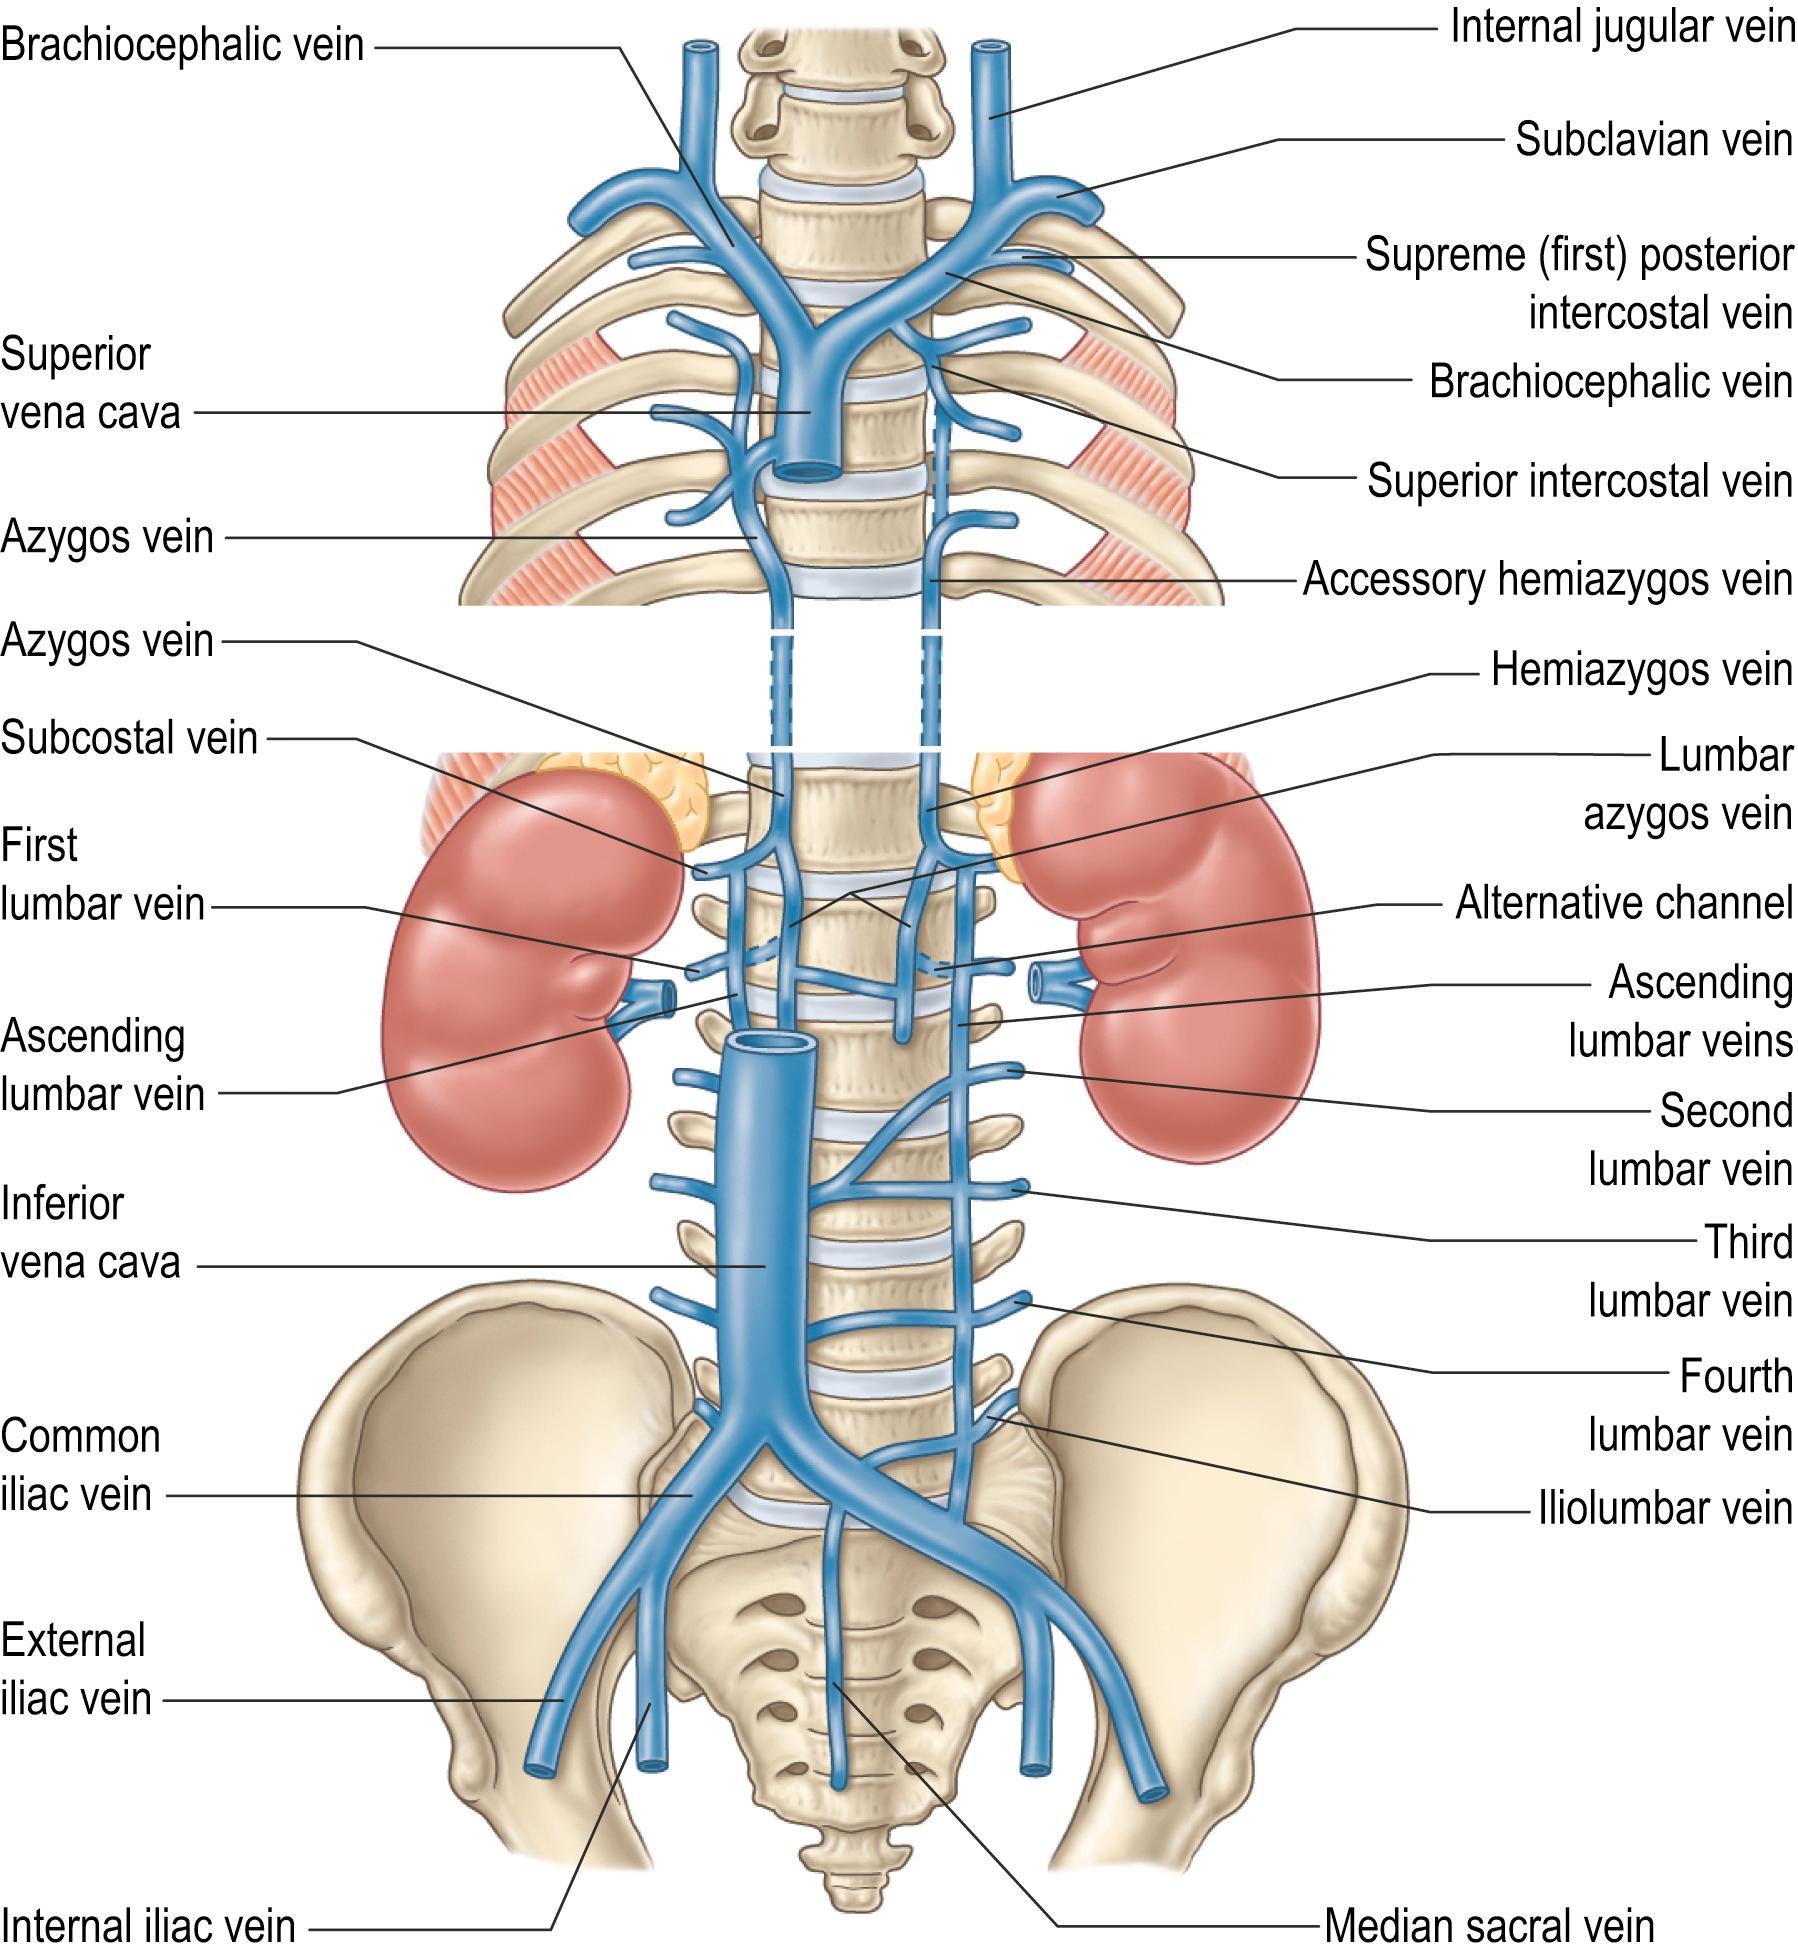 Fig. 56.3, The azygos venous system and its tributaries and connections.